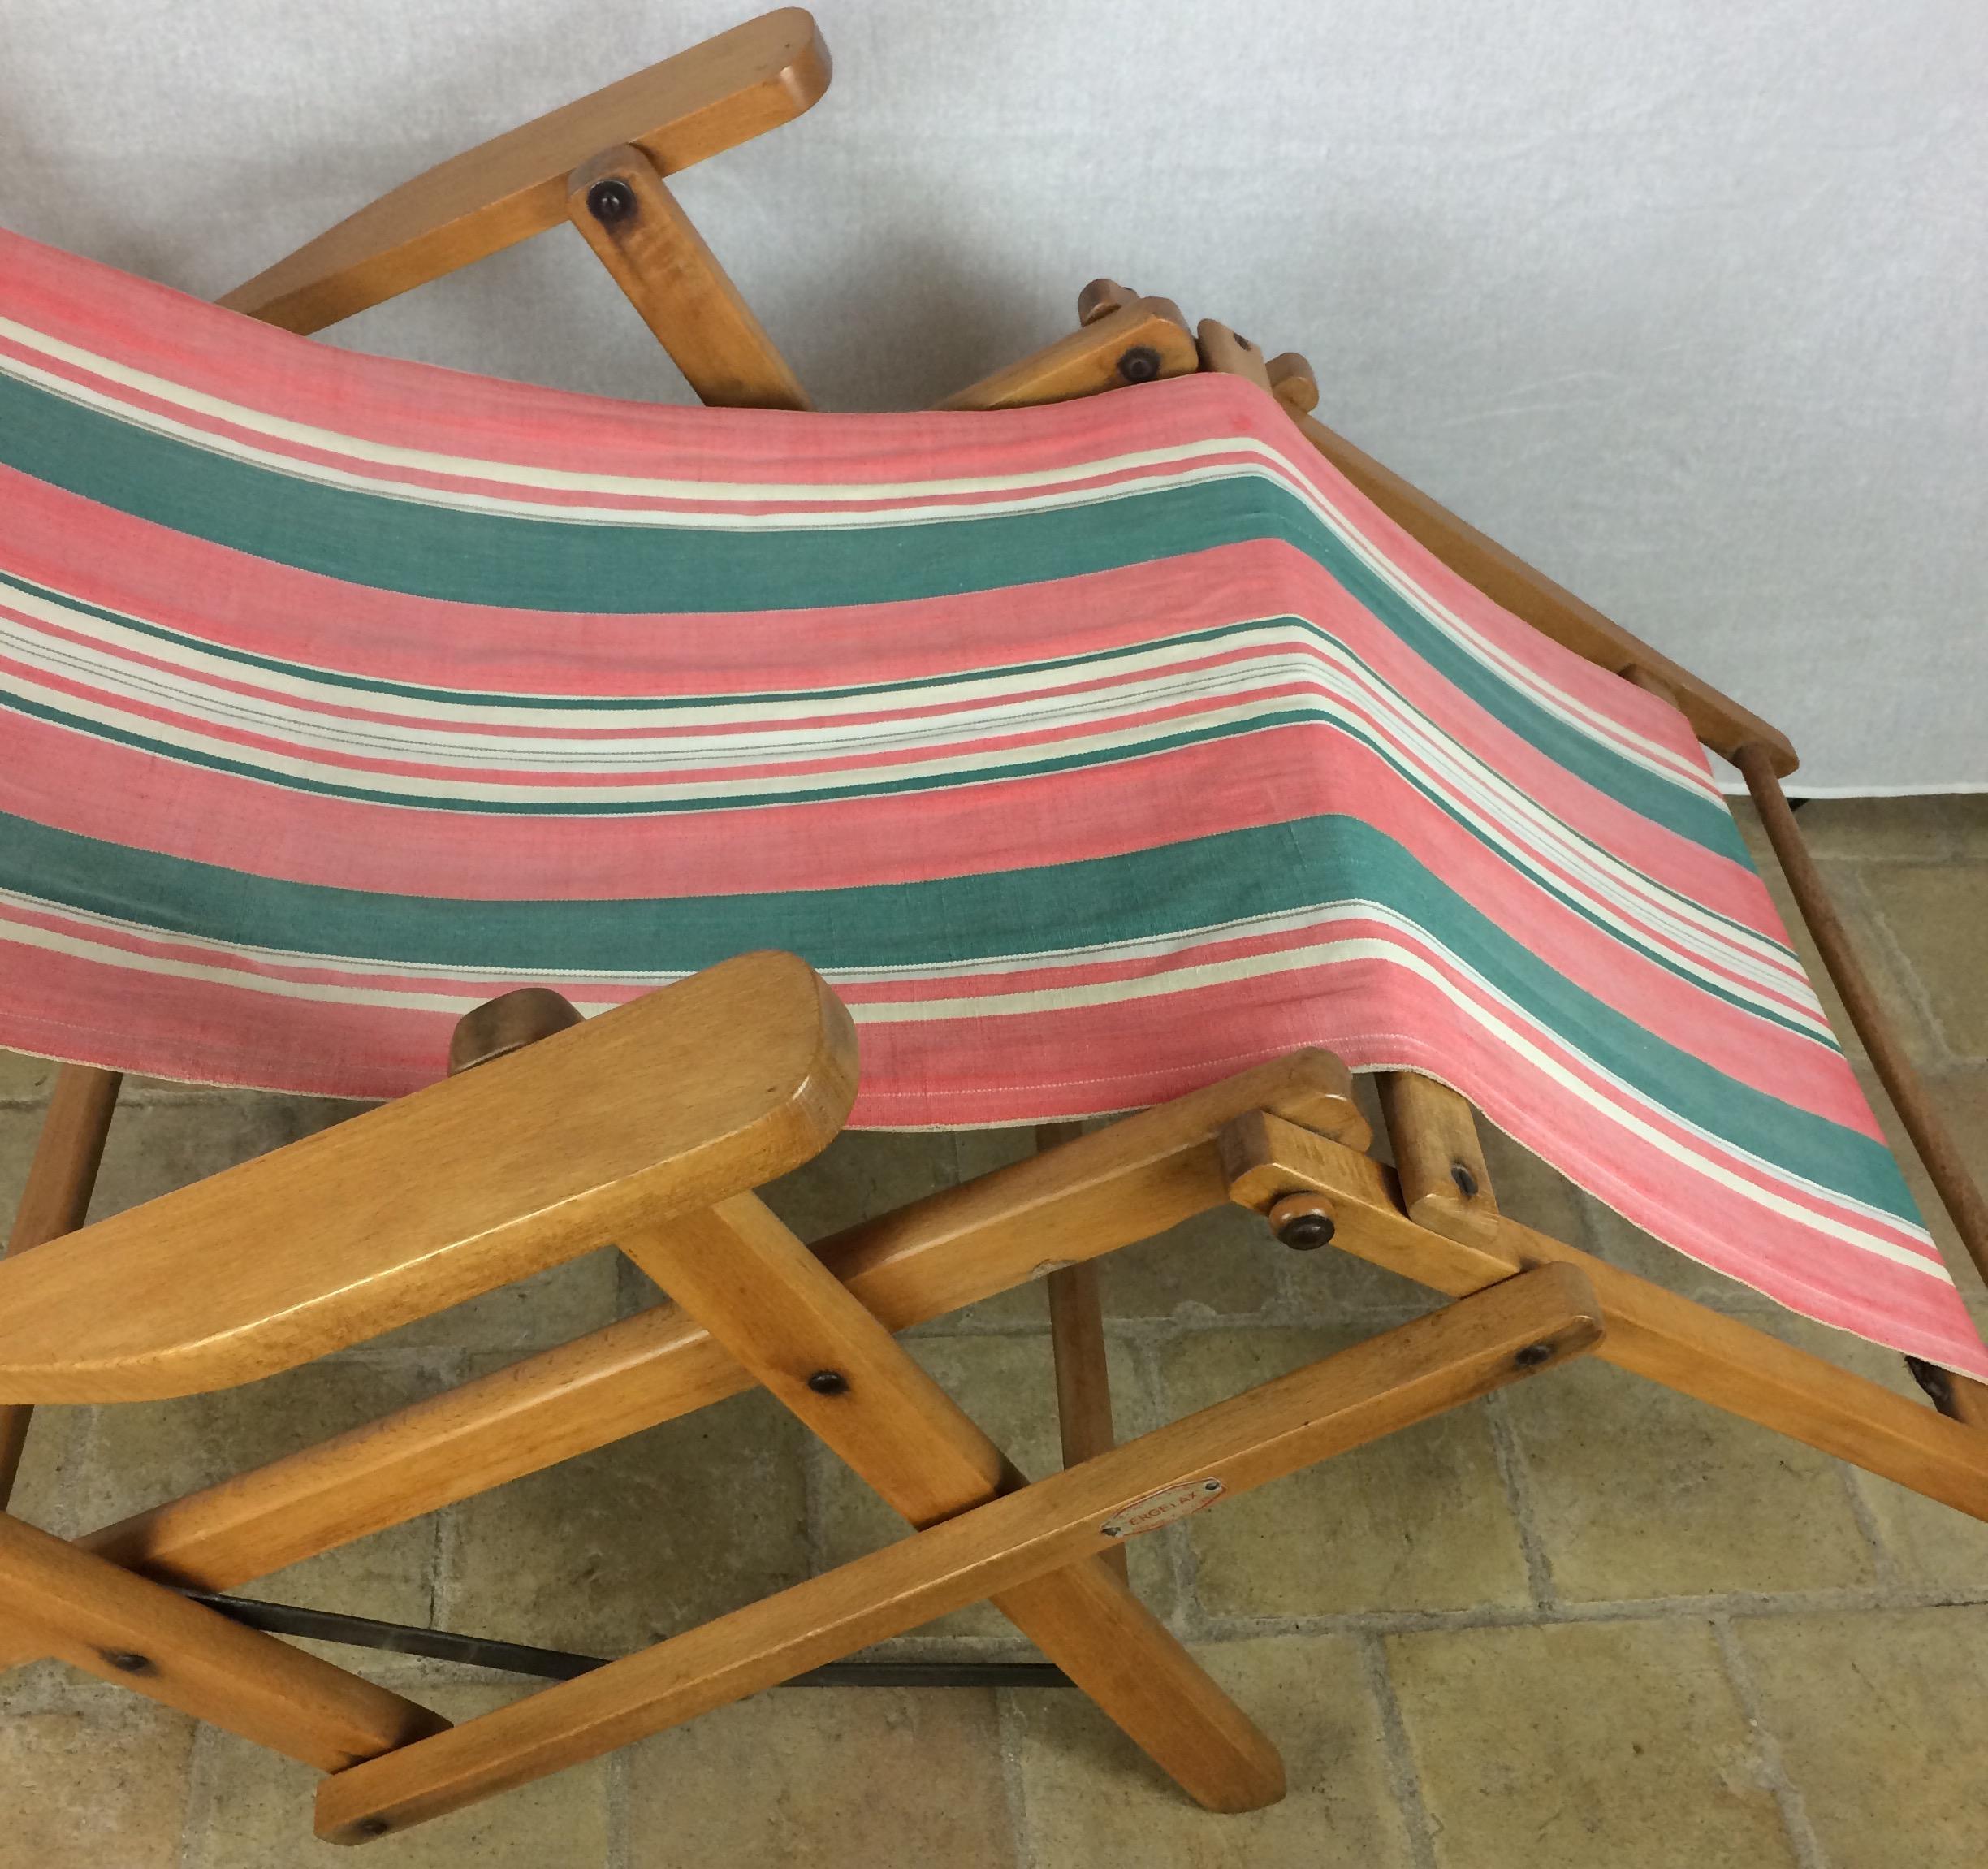 Polished Original American Midcentury Ergelax Folding Canvas Lounge Chair, circa 1950s For Sale